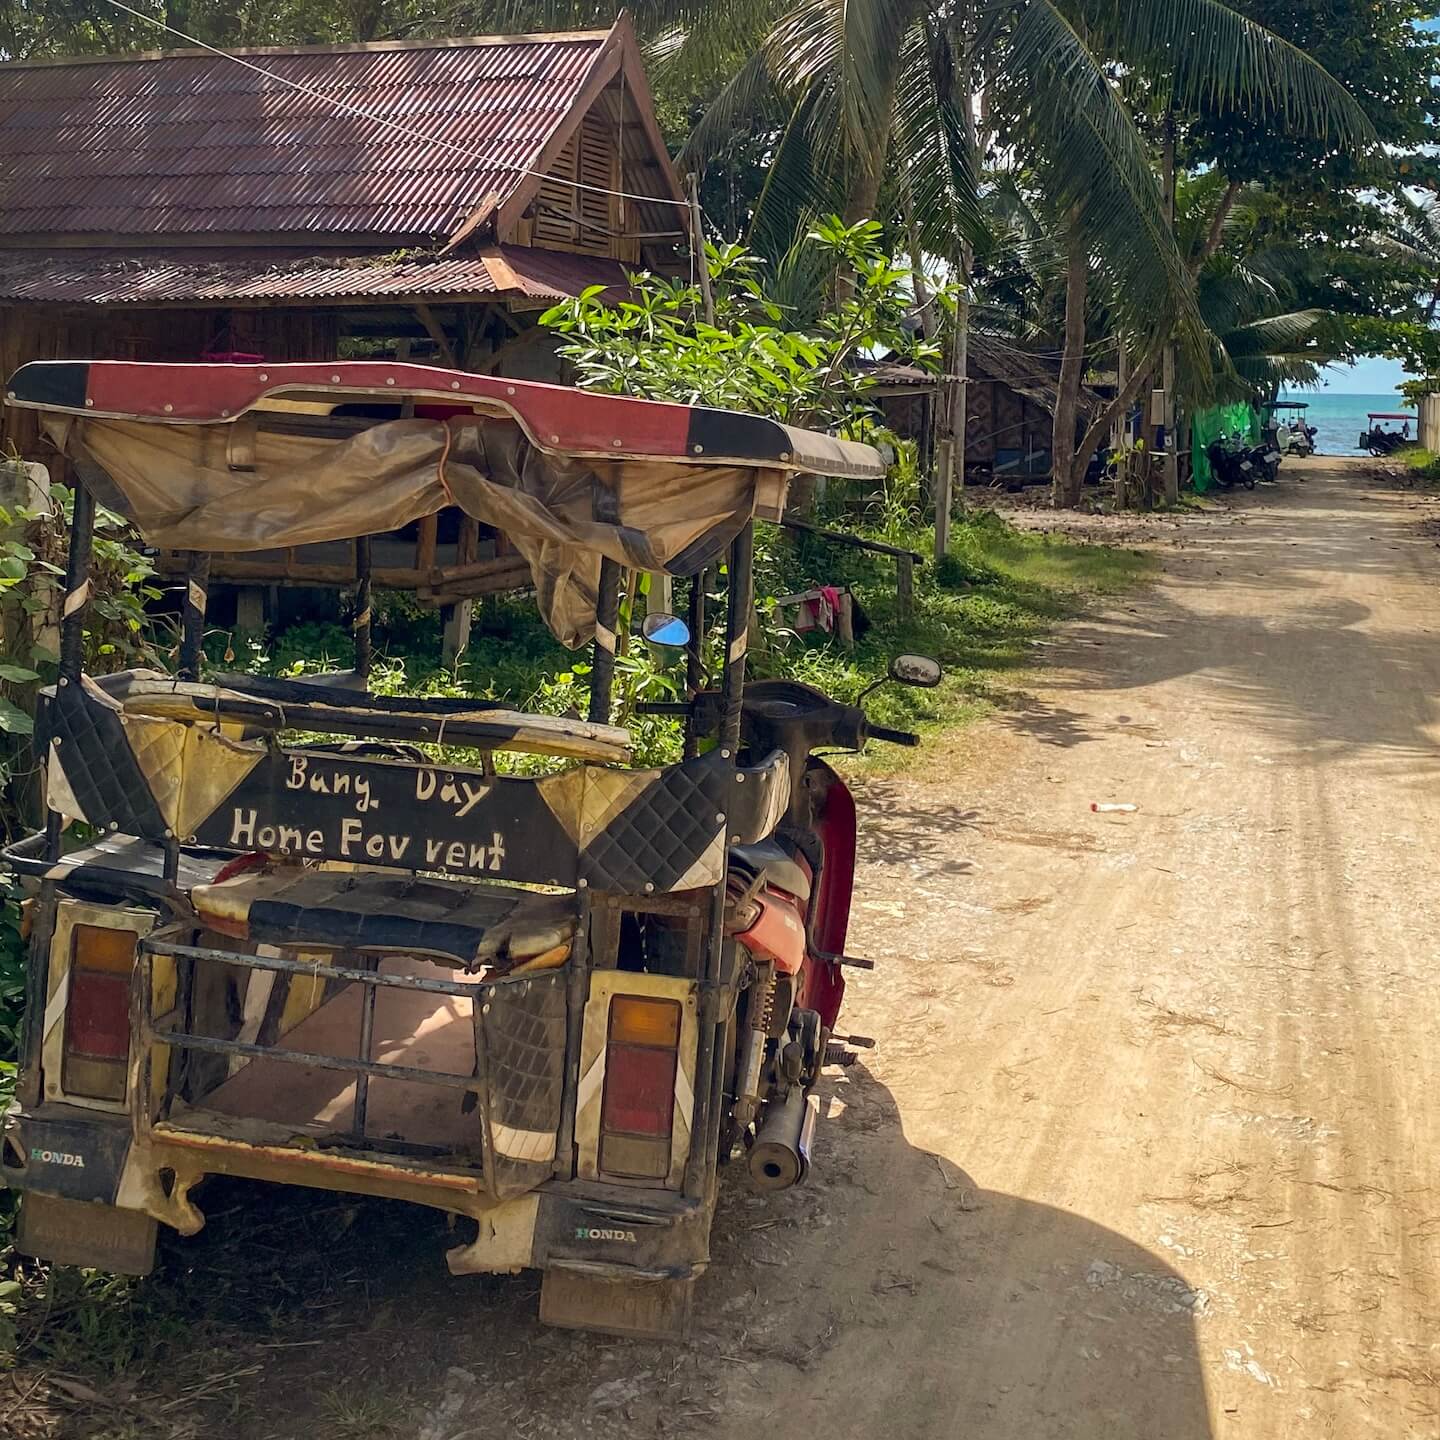 Scooter for rent in Koh Lanta